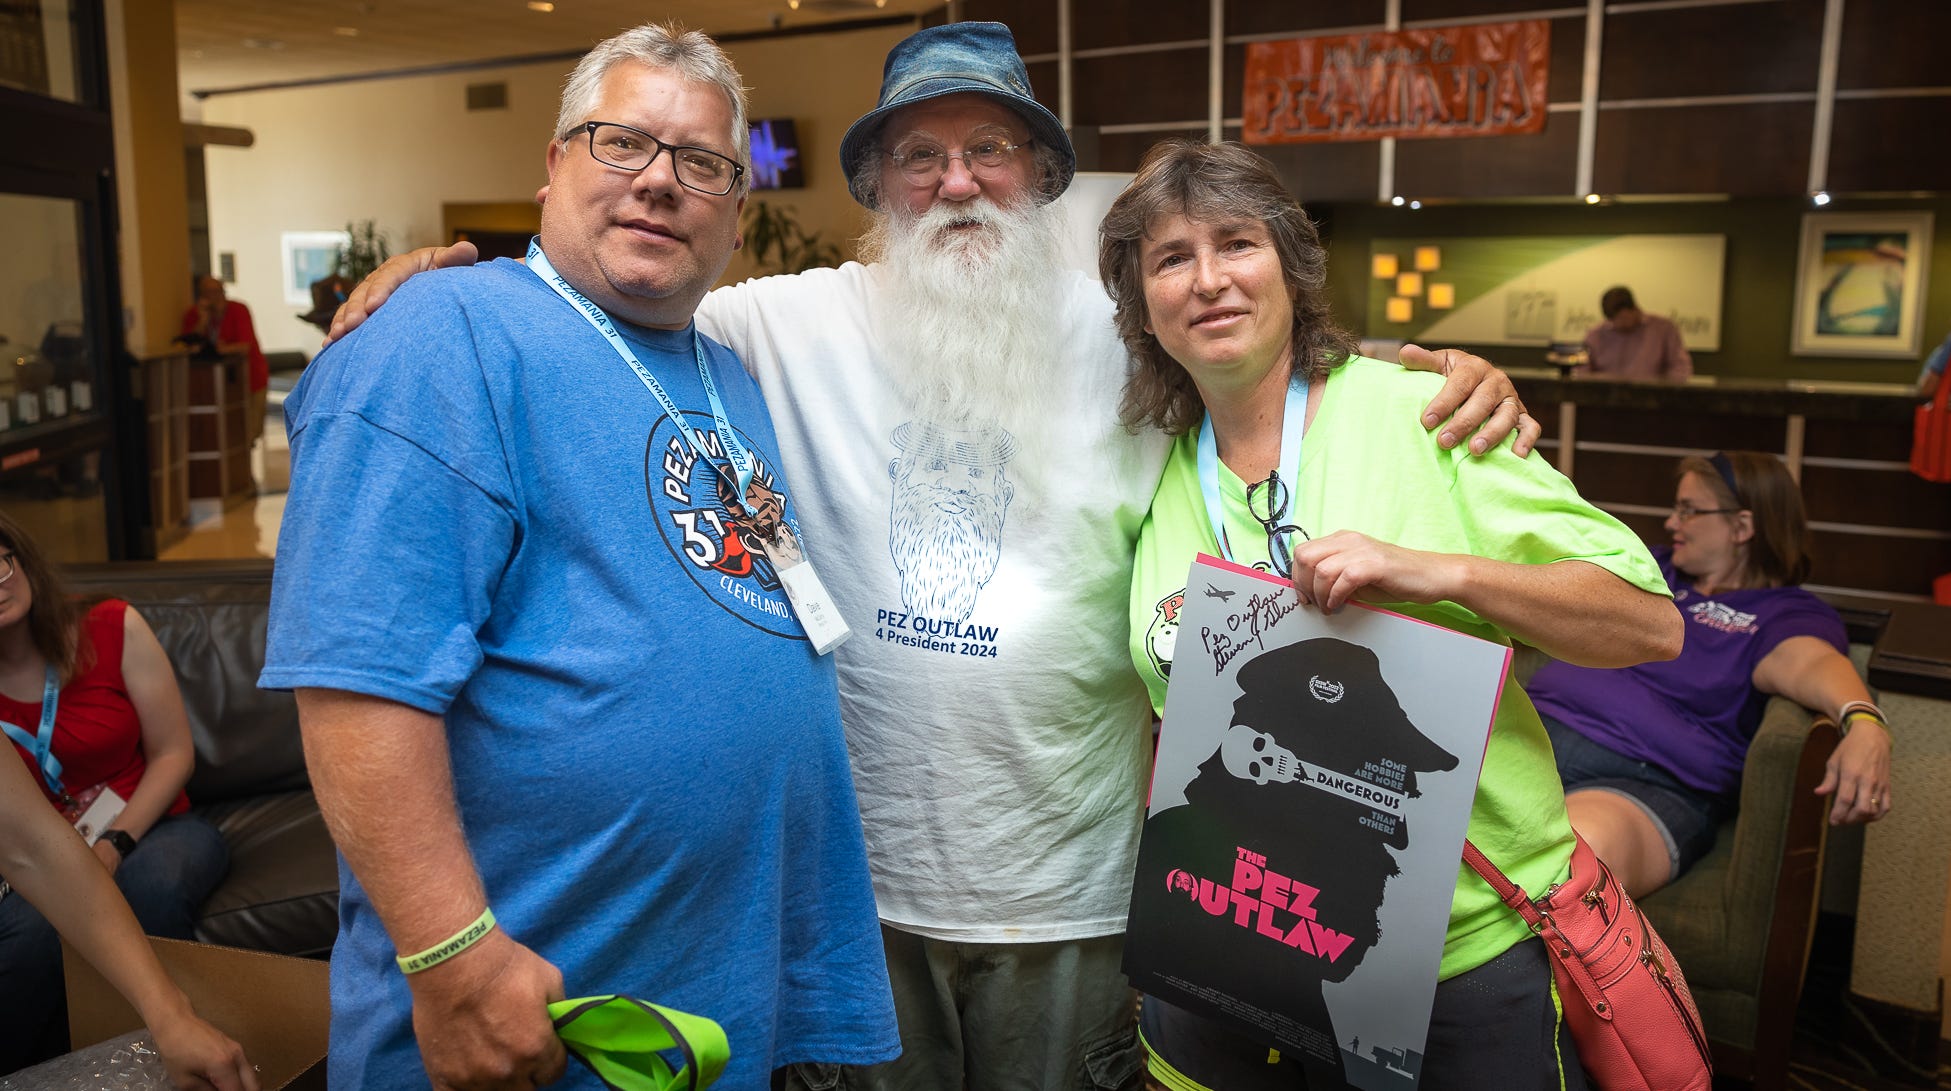 Steve Glew, center, poses with Dave McCarty, left, and Tracy McCarty of Philadelphia at Pezamania in Independence, Ohio, on July 22, 2022. Glew is an attraction at the annual event.